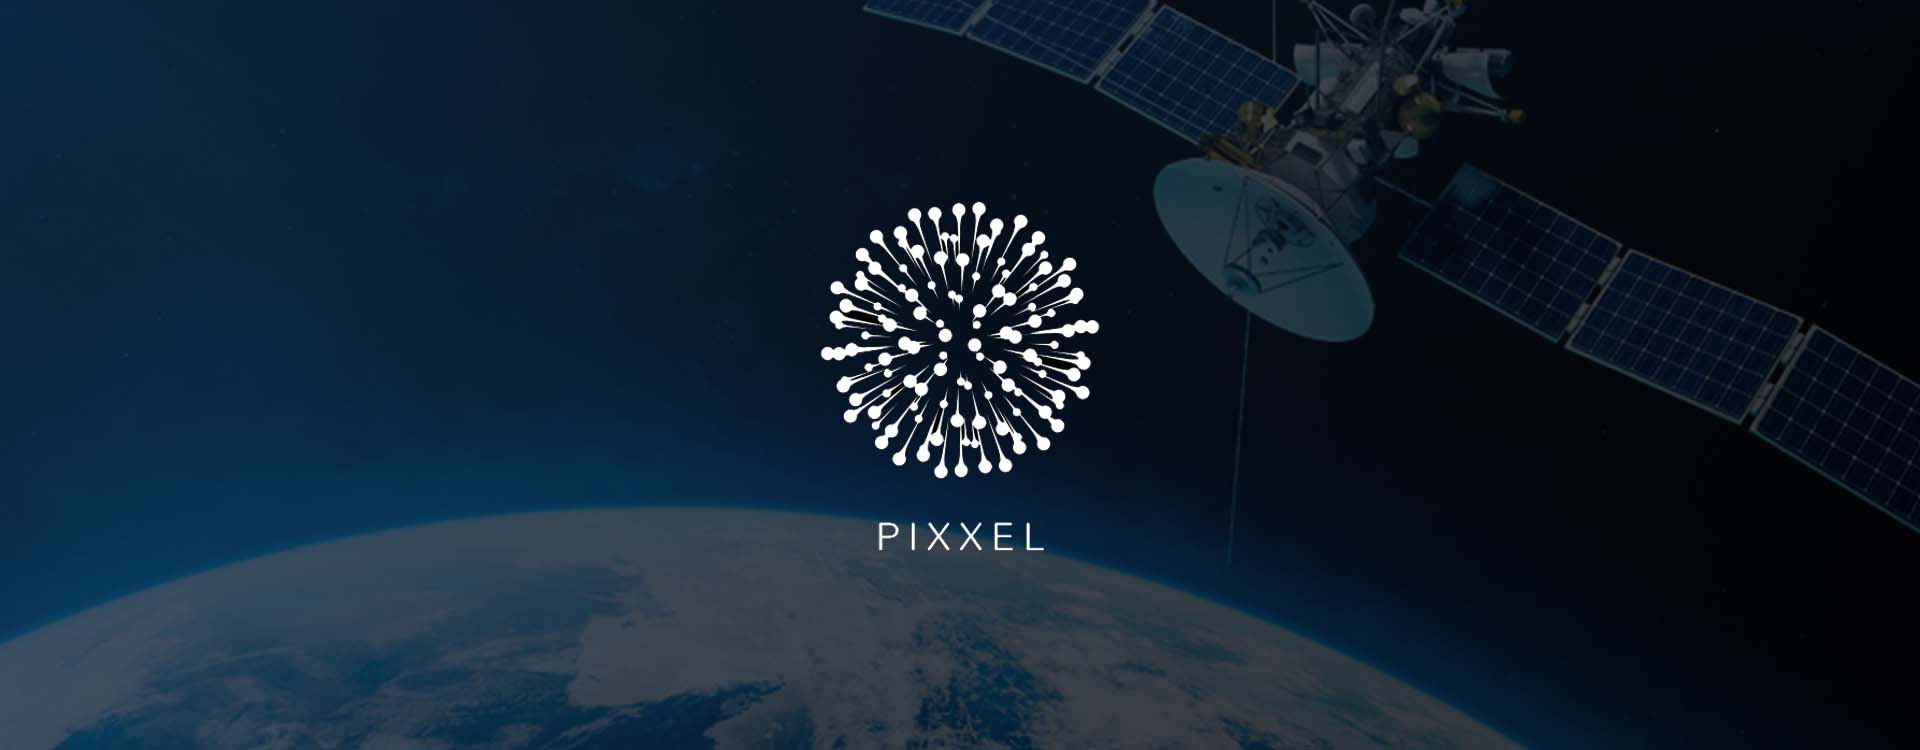 This is how Pixxel is changing the way we use satellites